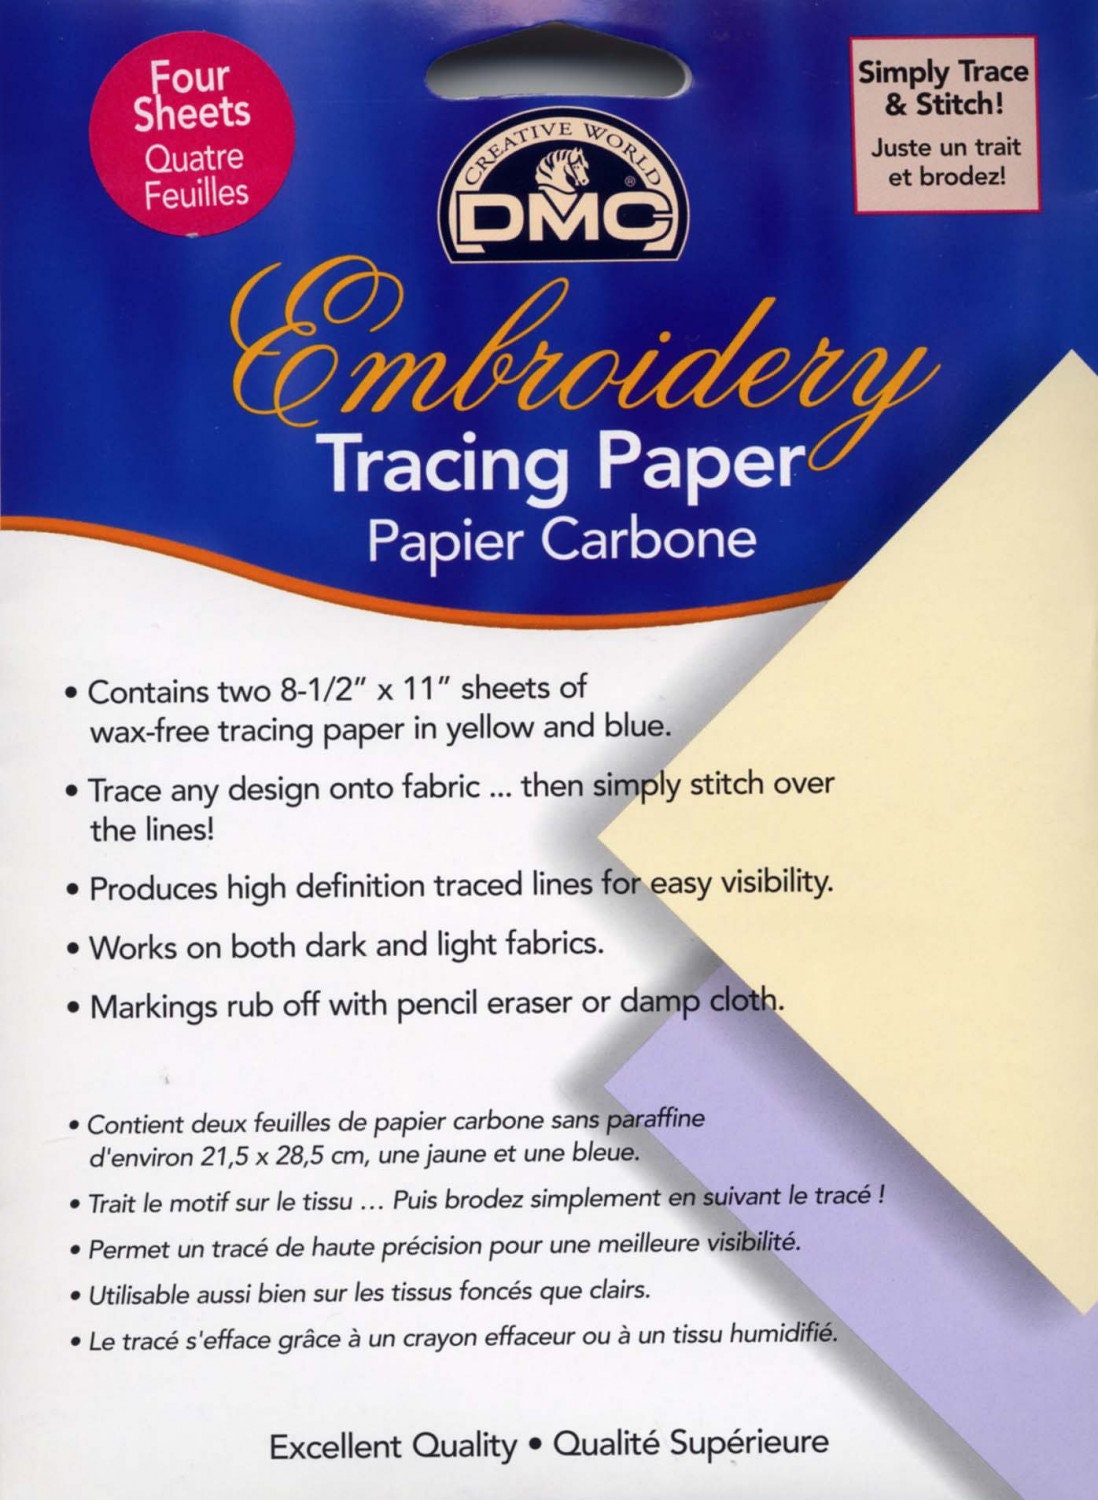 DMC Embroidery Tracing Paper 4 Sheets 8.5 X 11 Wax-free 2 Yellow and 2 Blue  Papier Carbone 21.5 X 28.5cm 